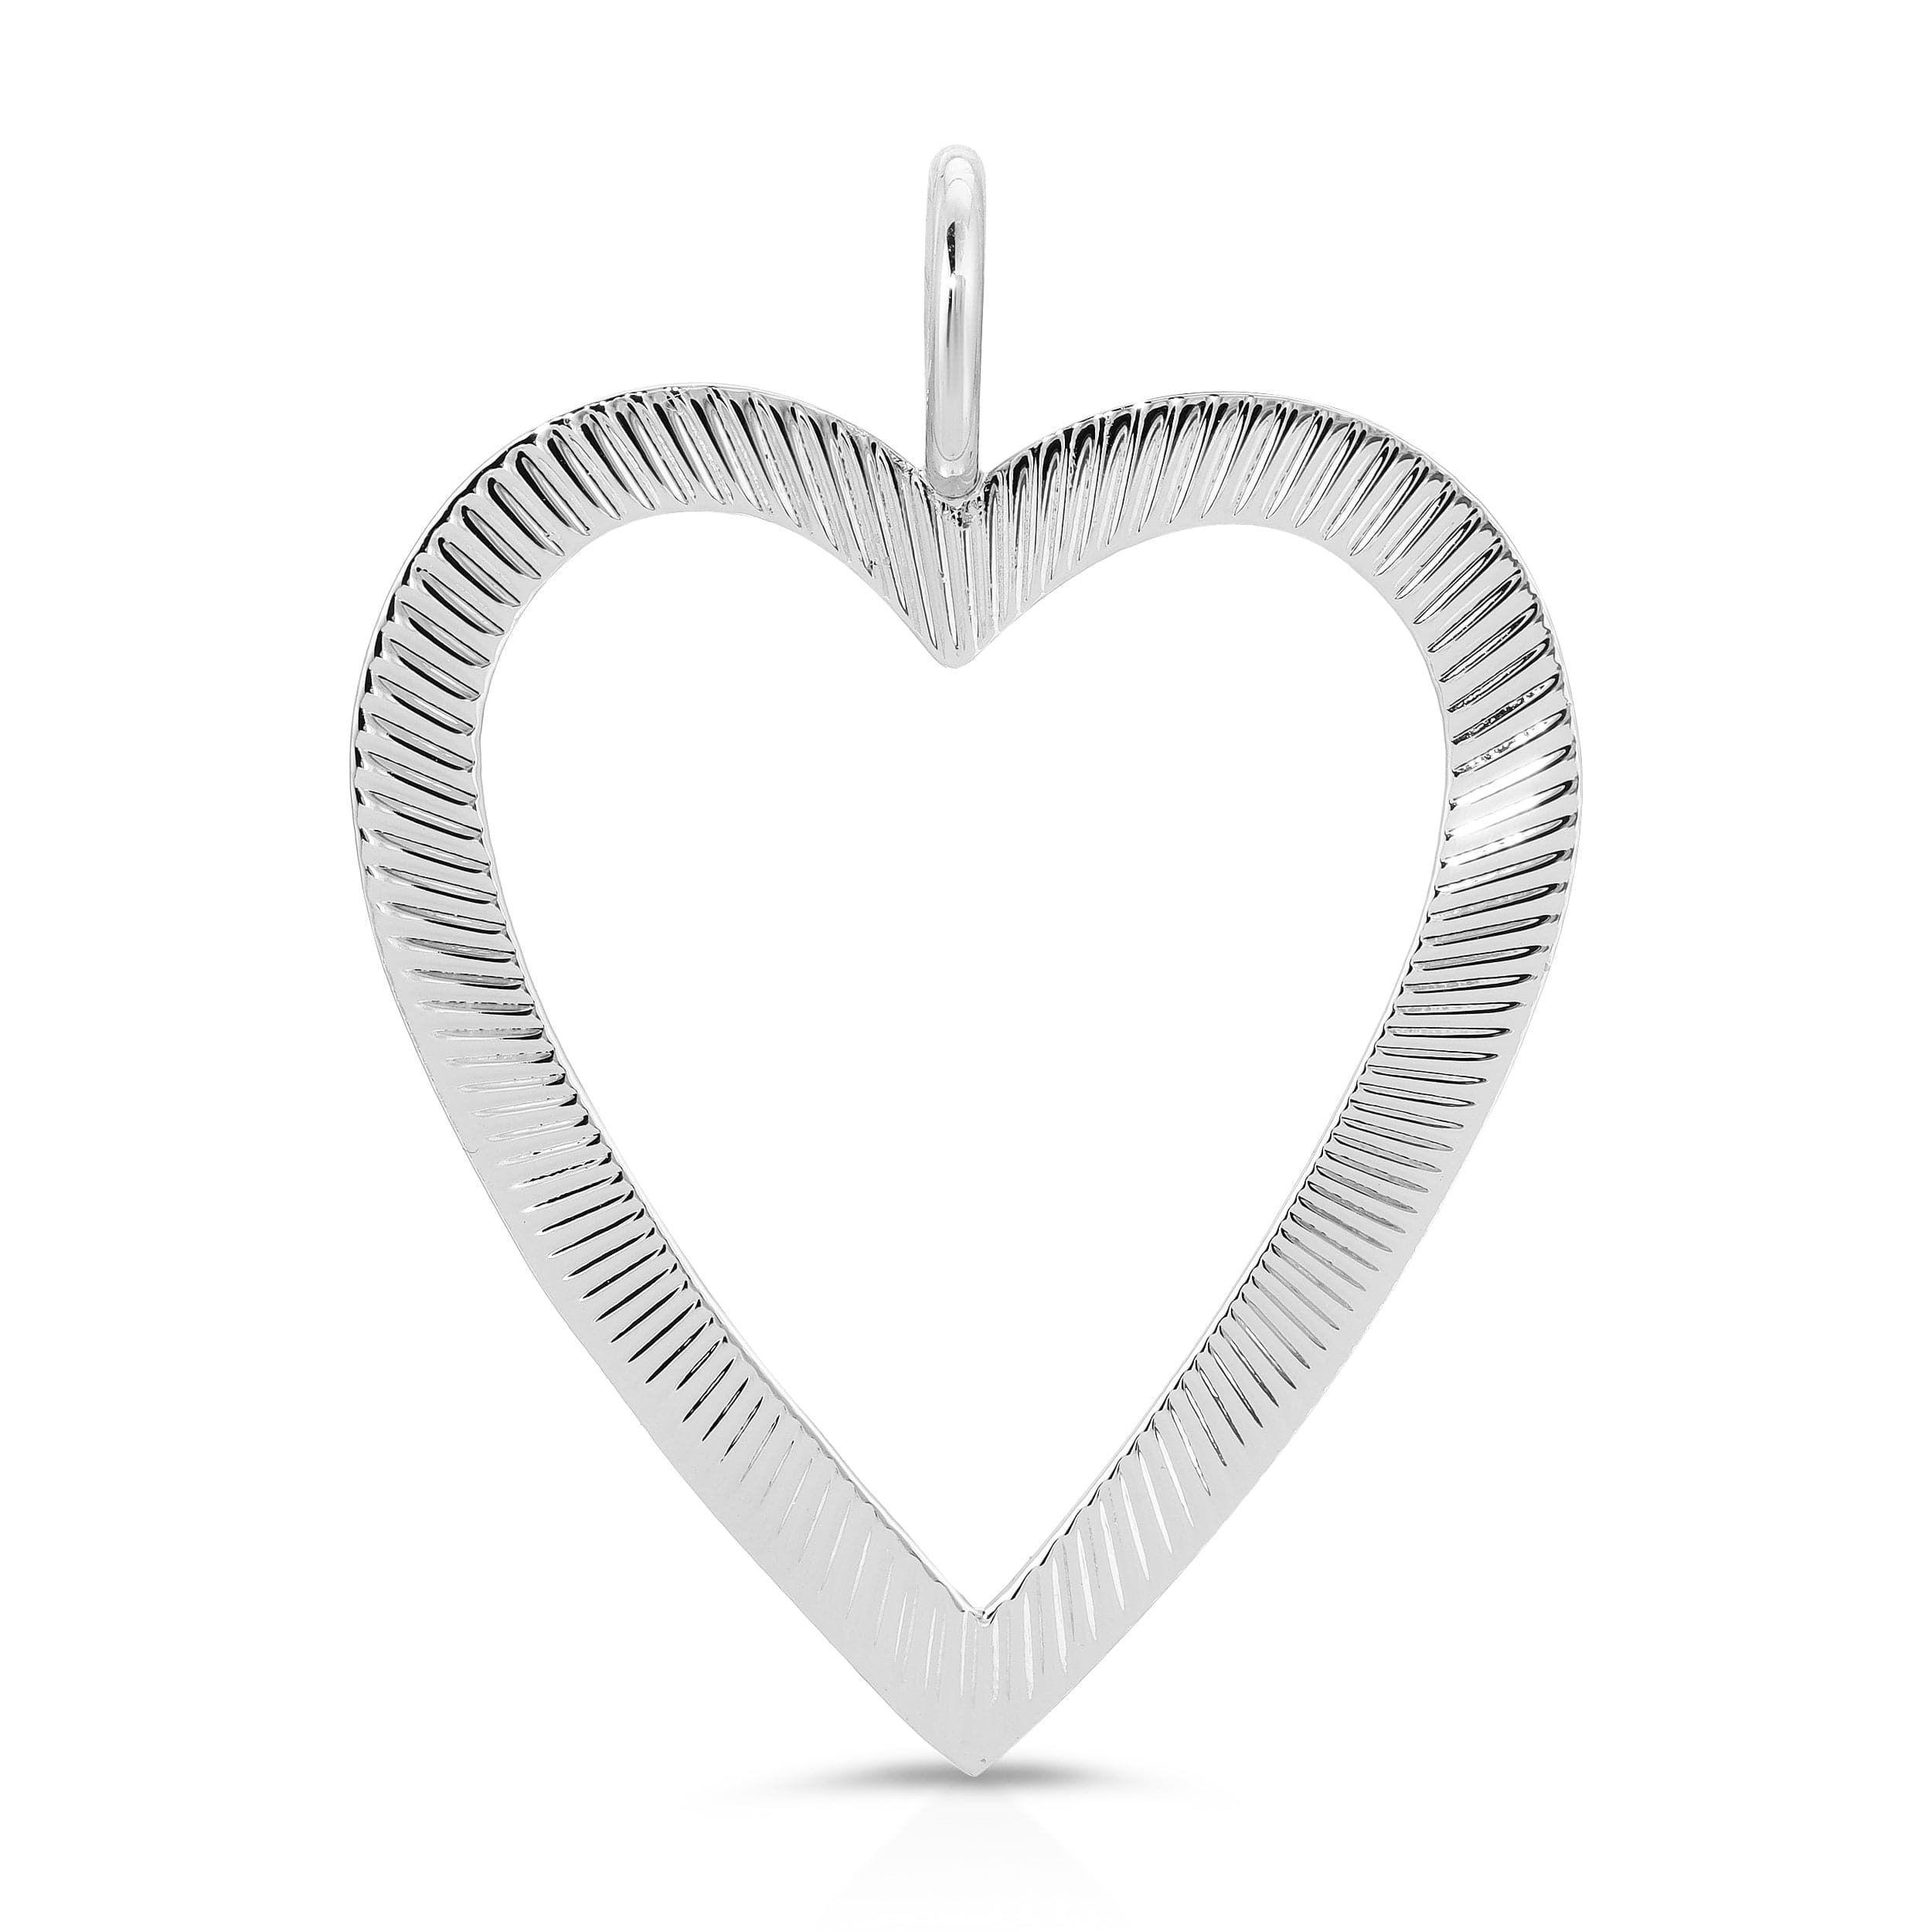 a heart shaped pendant on a white background